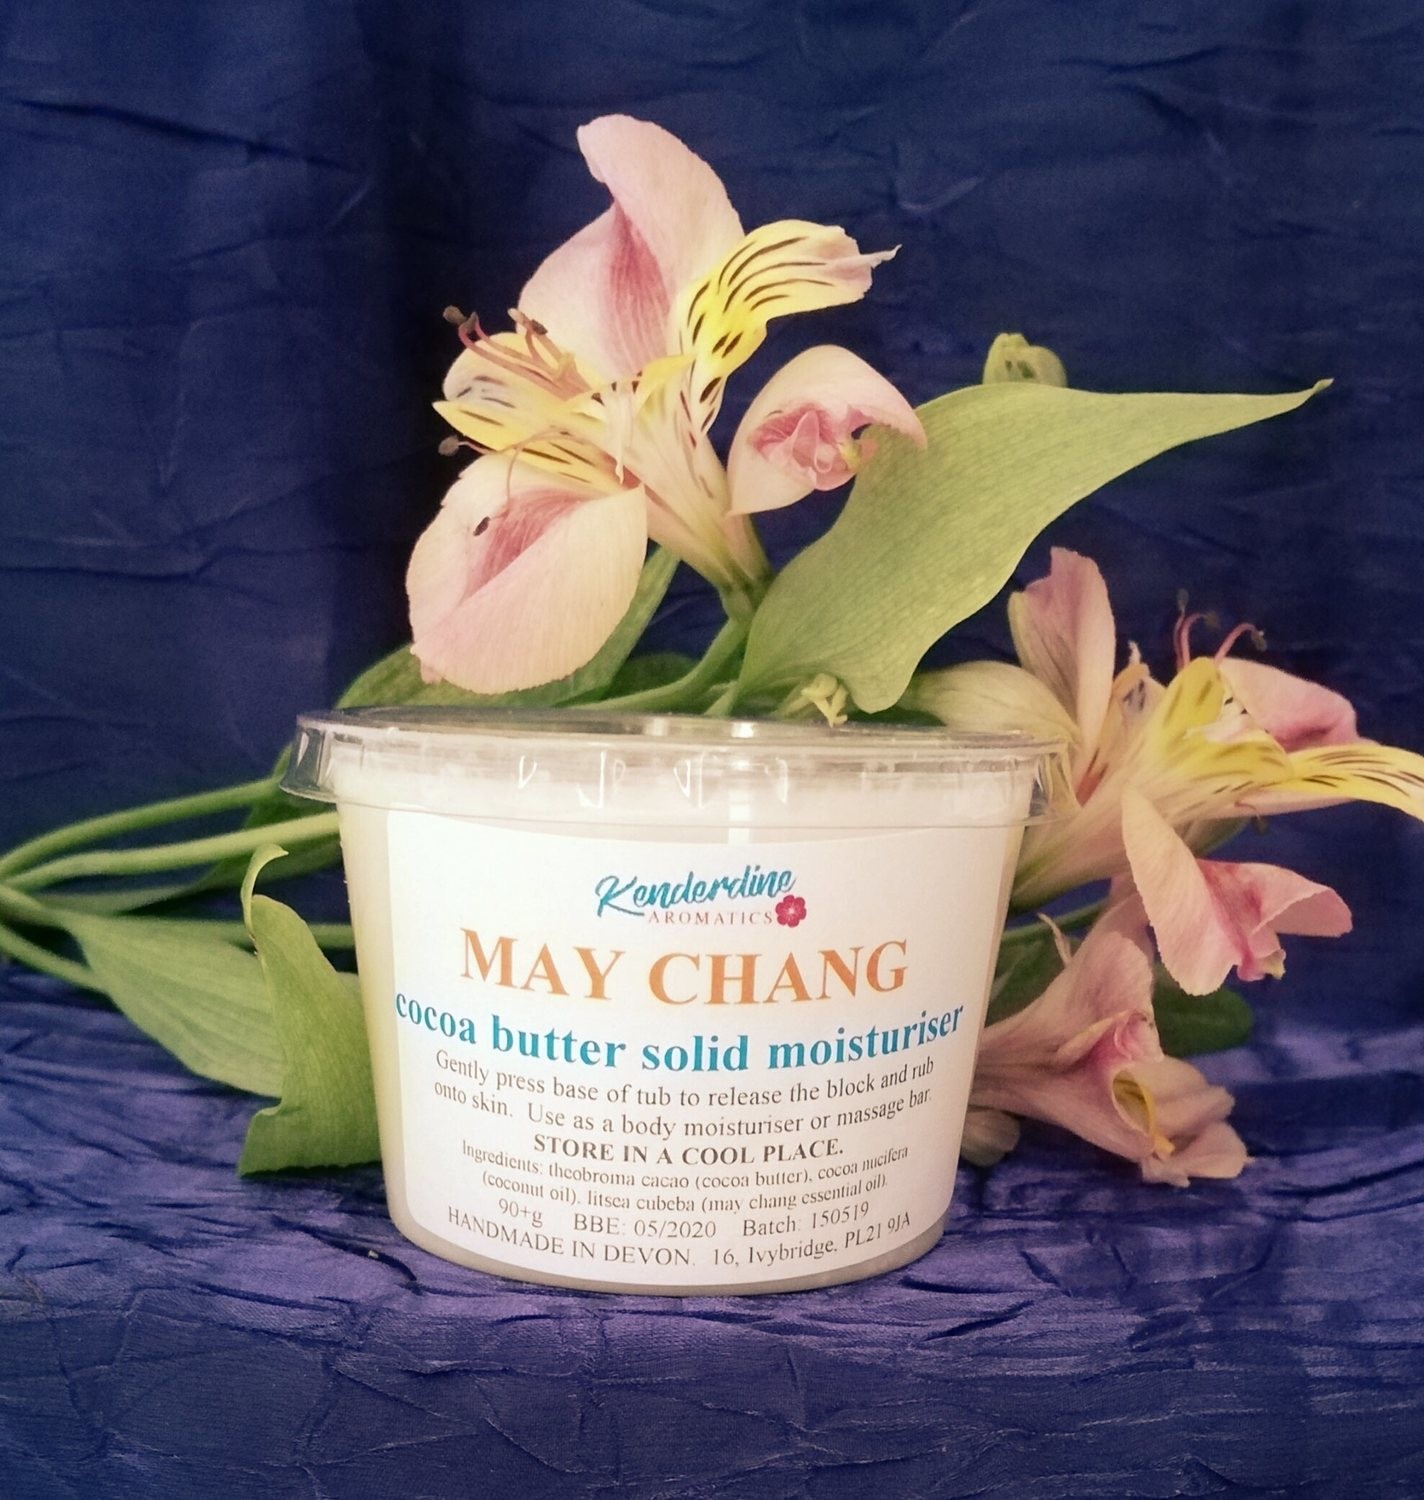 Cocoa butter solid moisturiser - May Chang